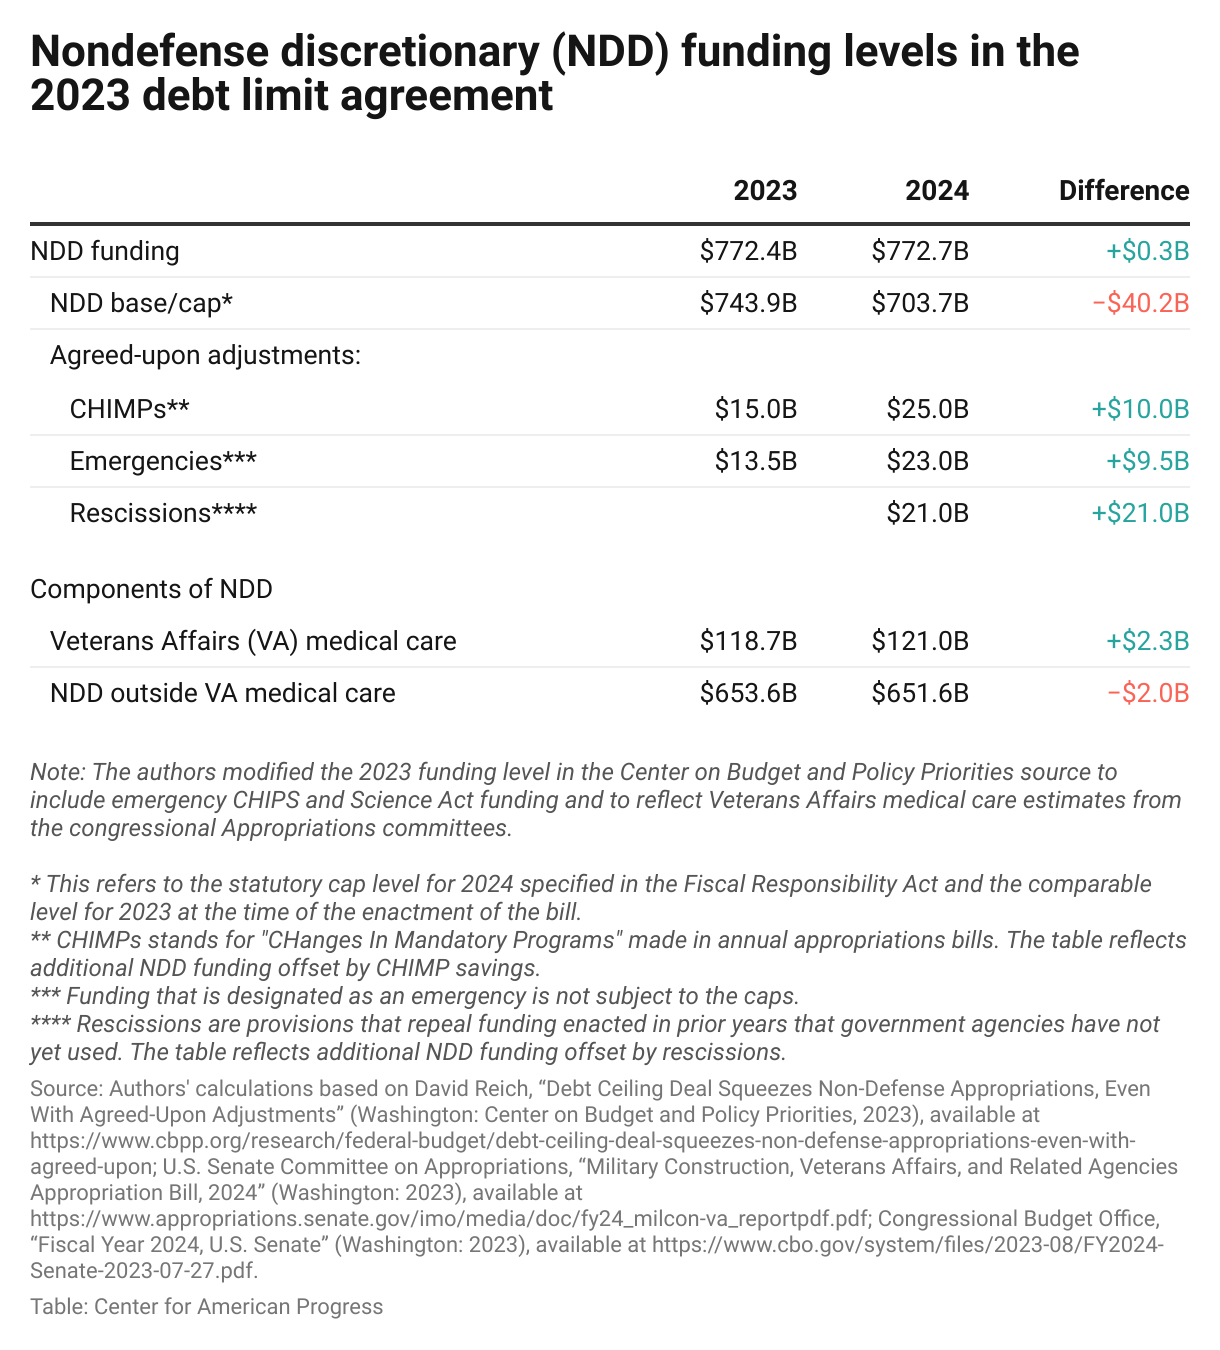 Table comparing the nondefense discretionary spending levels under the debt limit deal for fiscal year 2024 with the levels for fiscal year 2023.